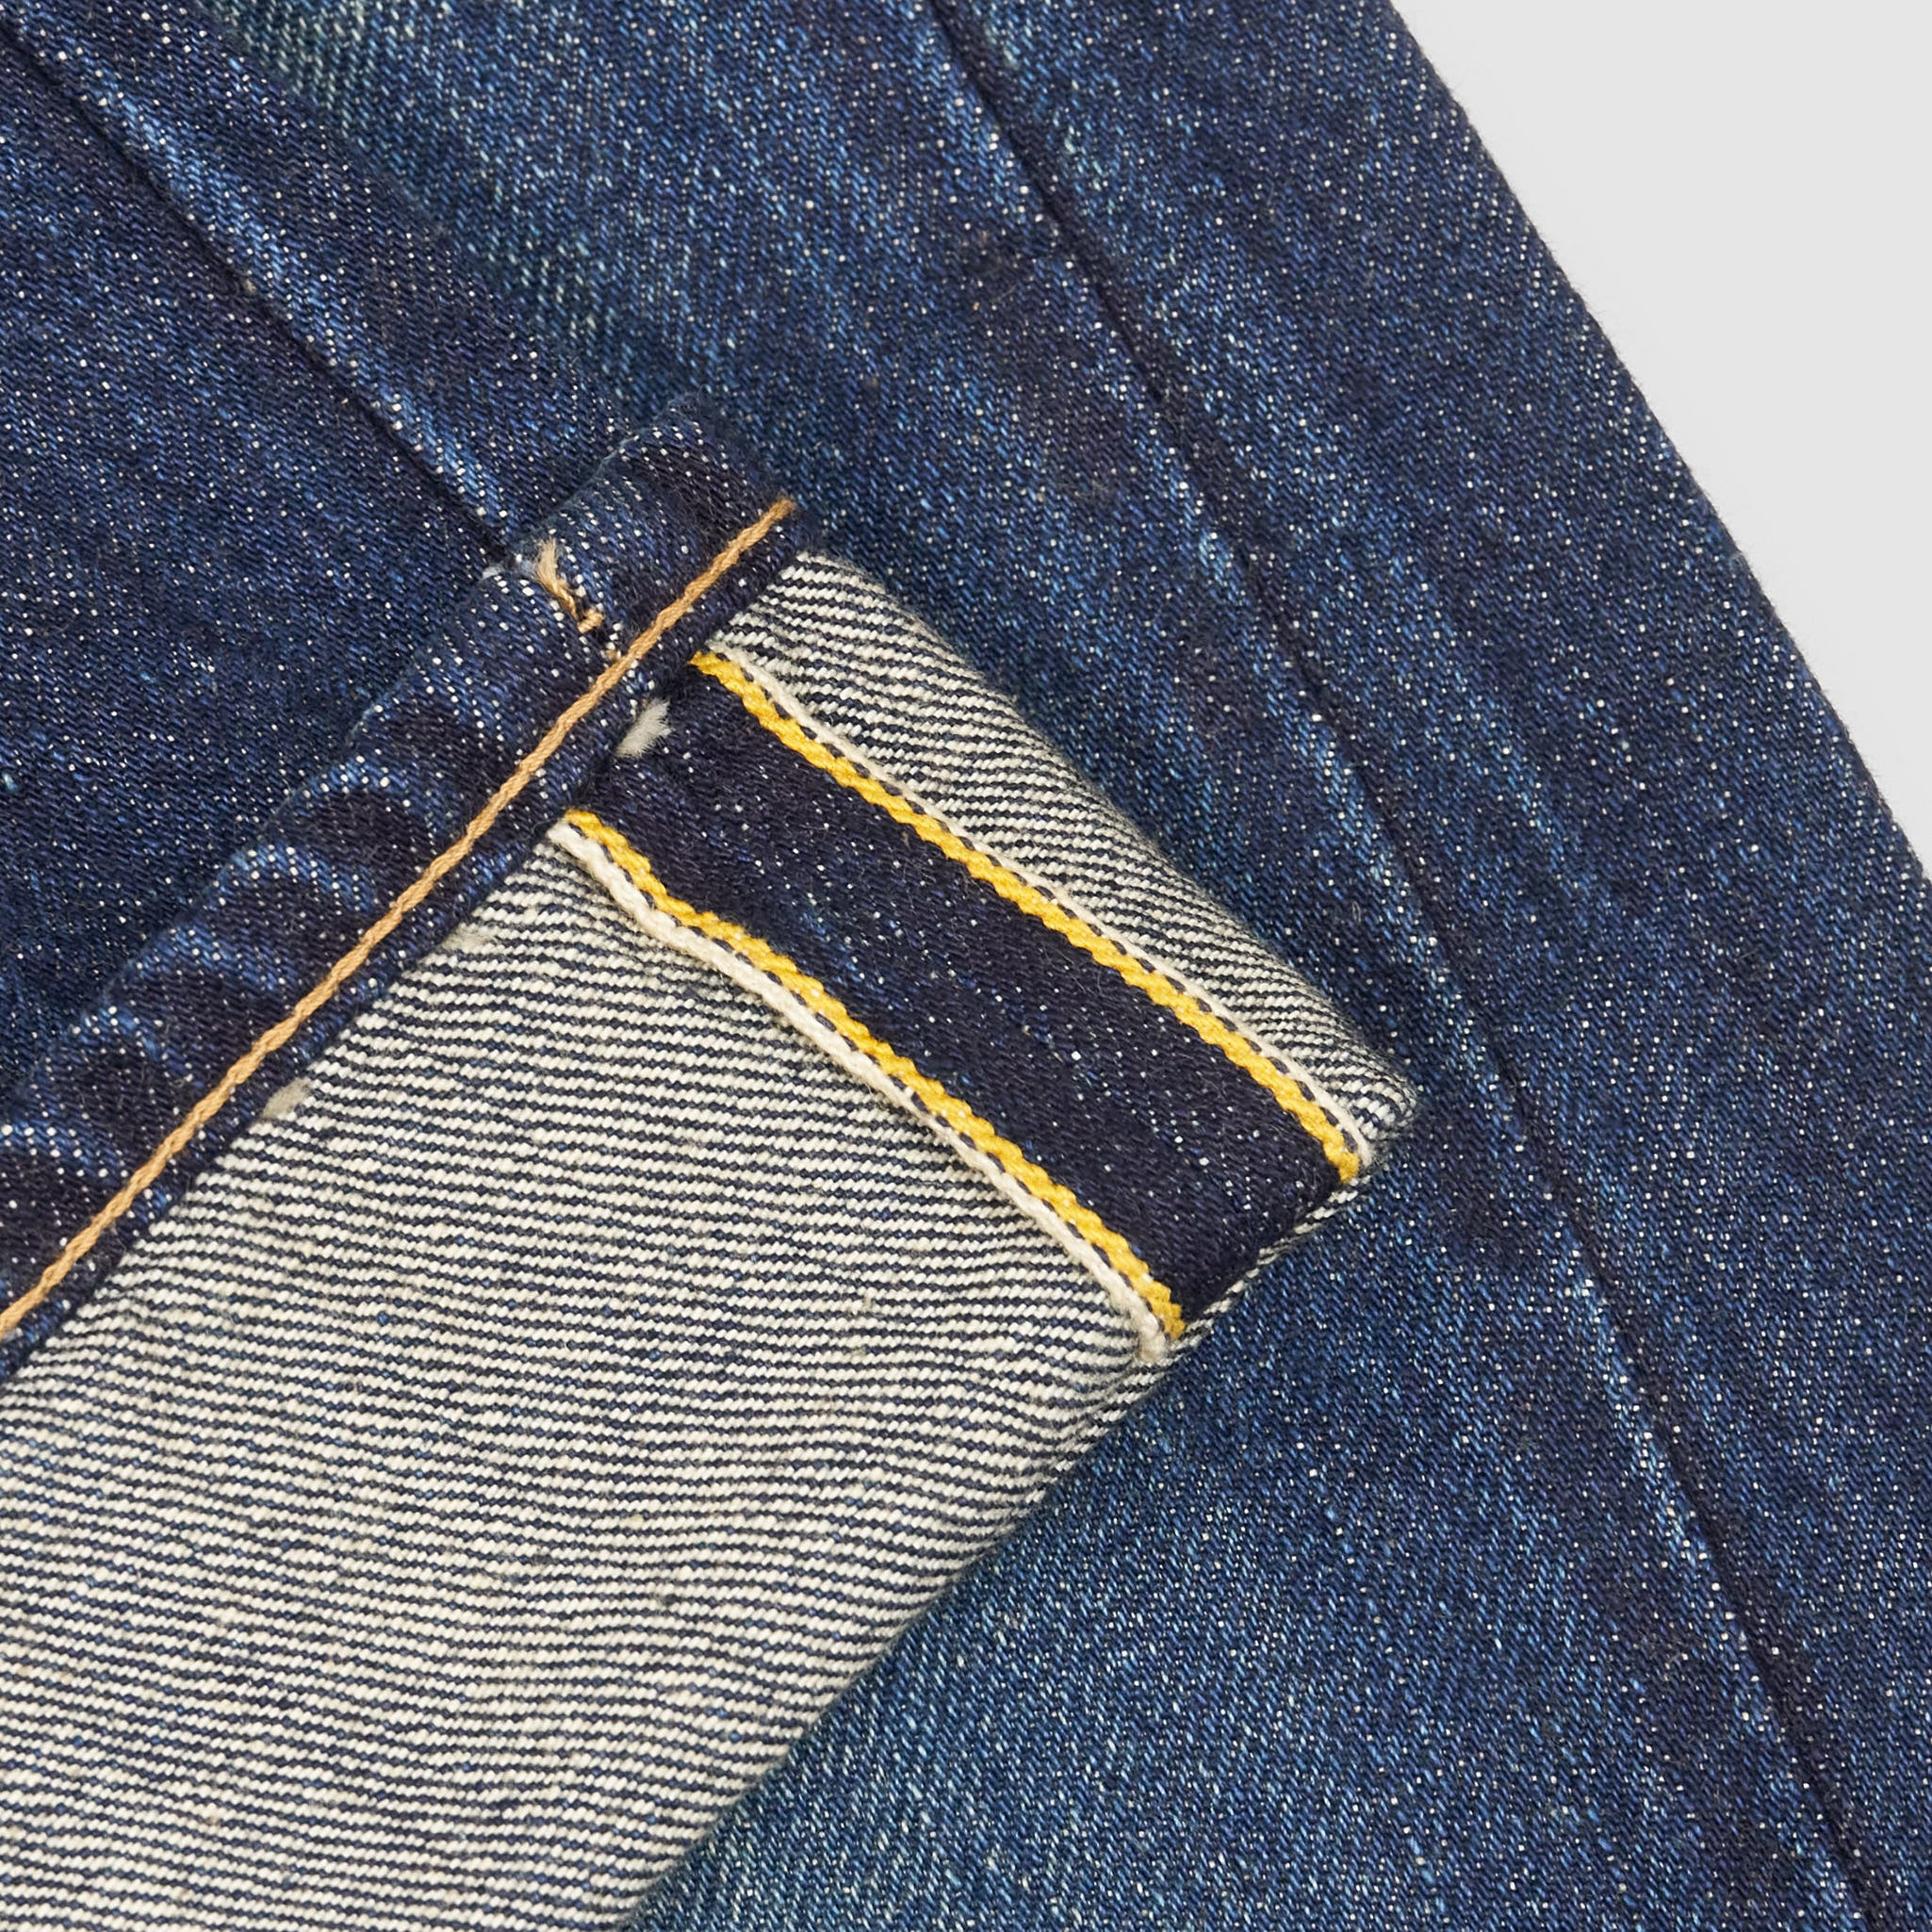 The Pros and Cons of Raw Denim vs. Pre-Washed Jeans | by Thomas Stege Bojer  | Medium